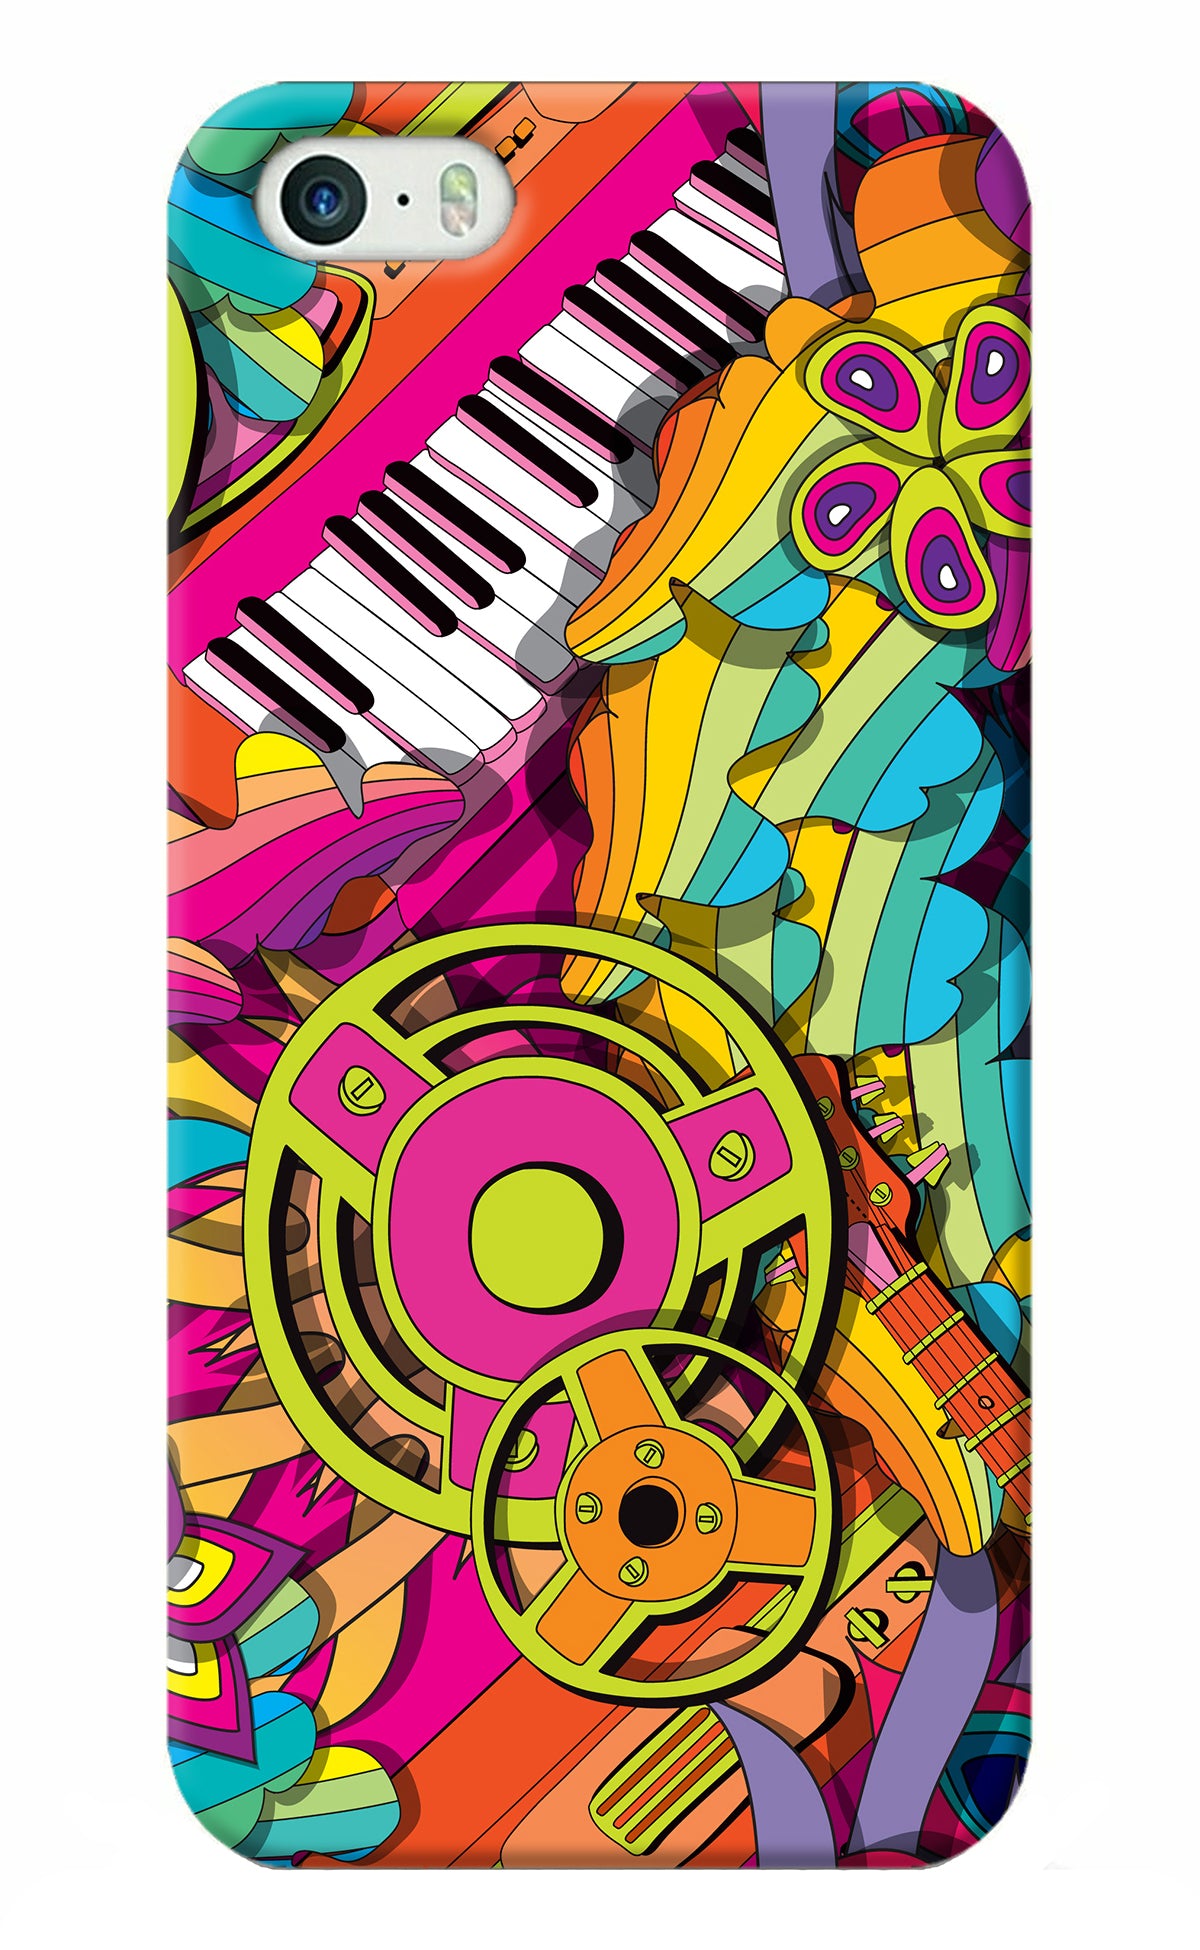 Music Doodle iPhone 5/5s Back Cover